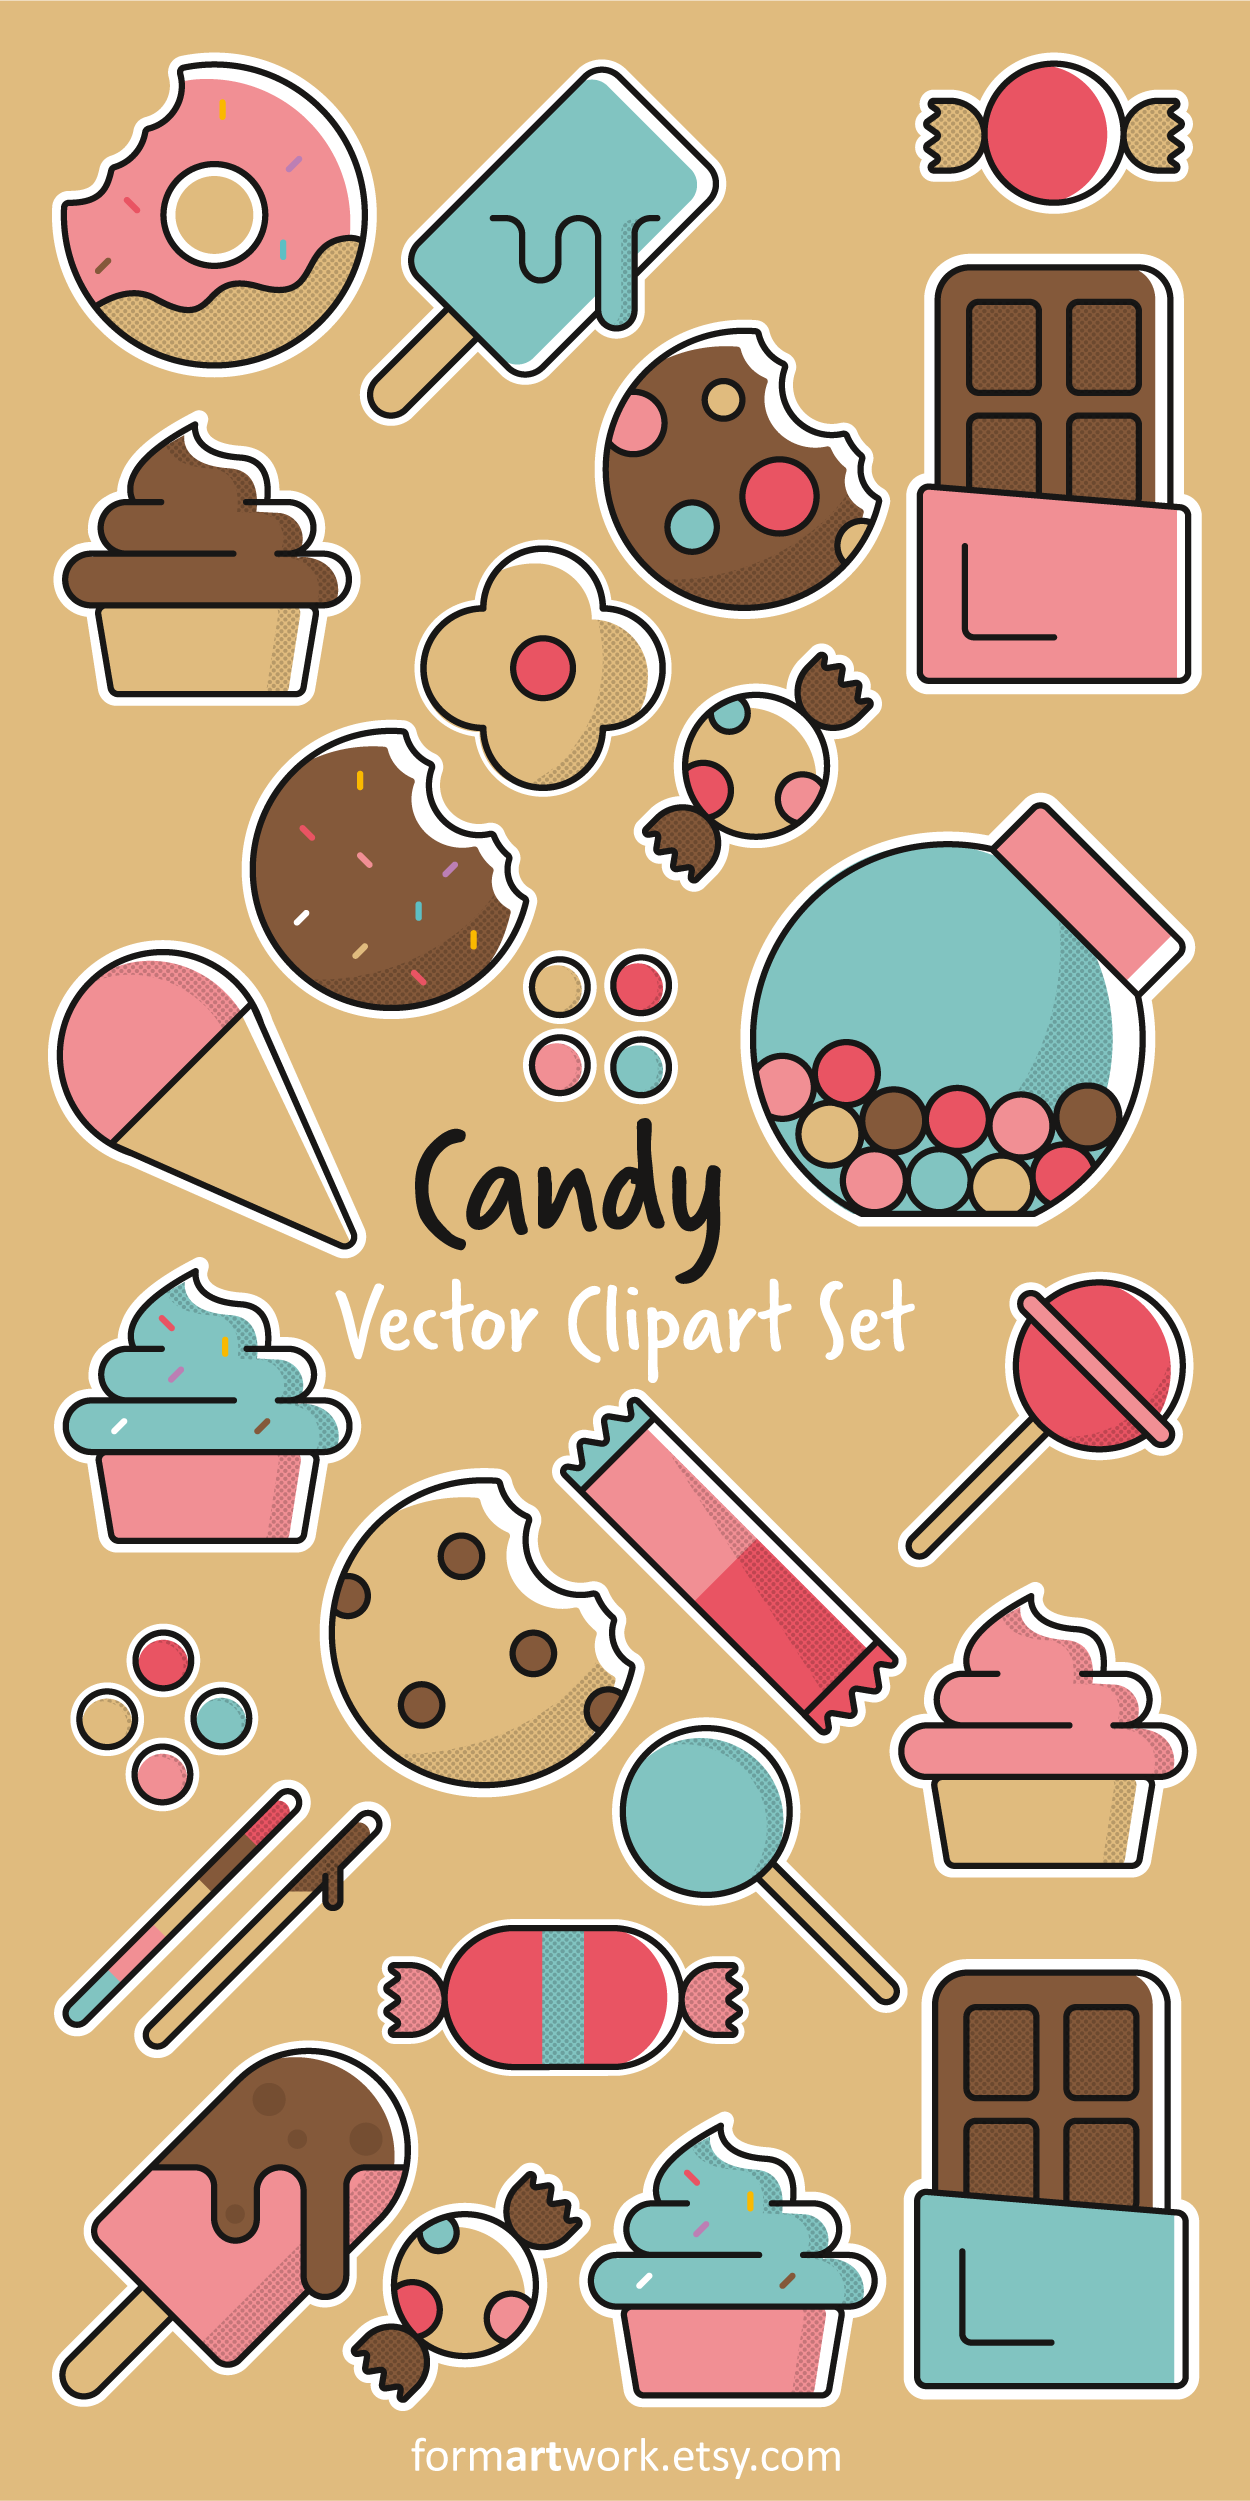 clipart candy vector